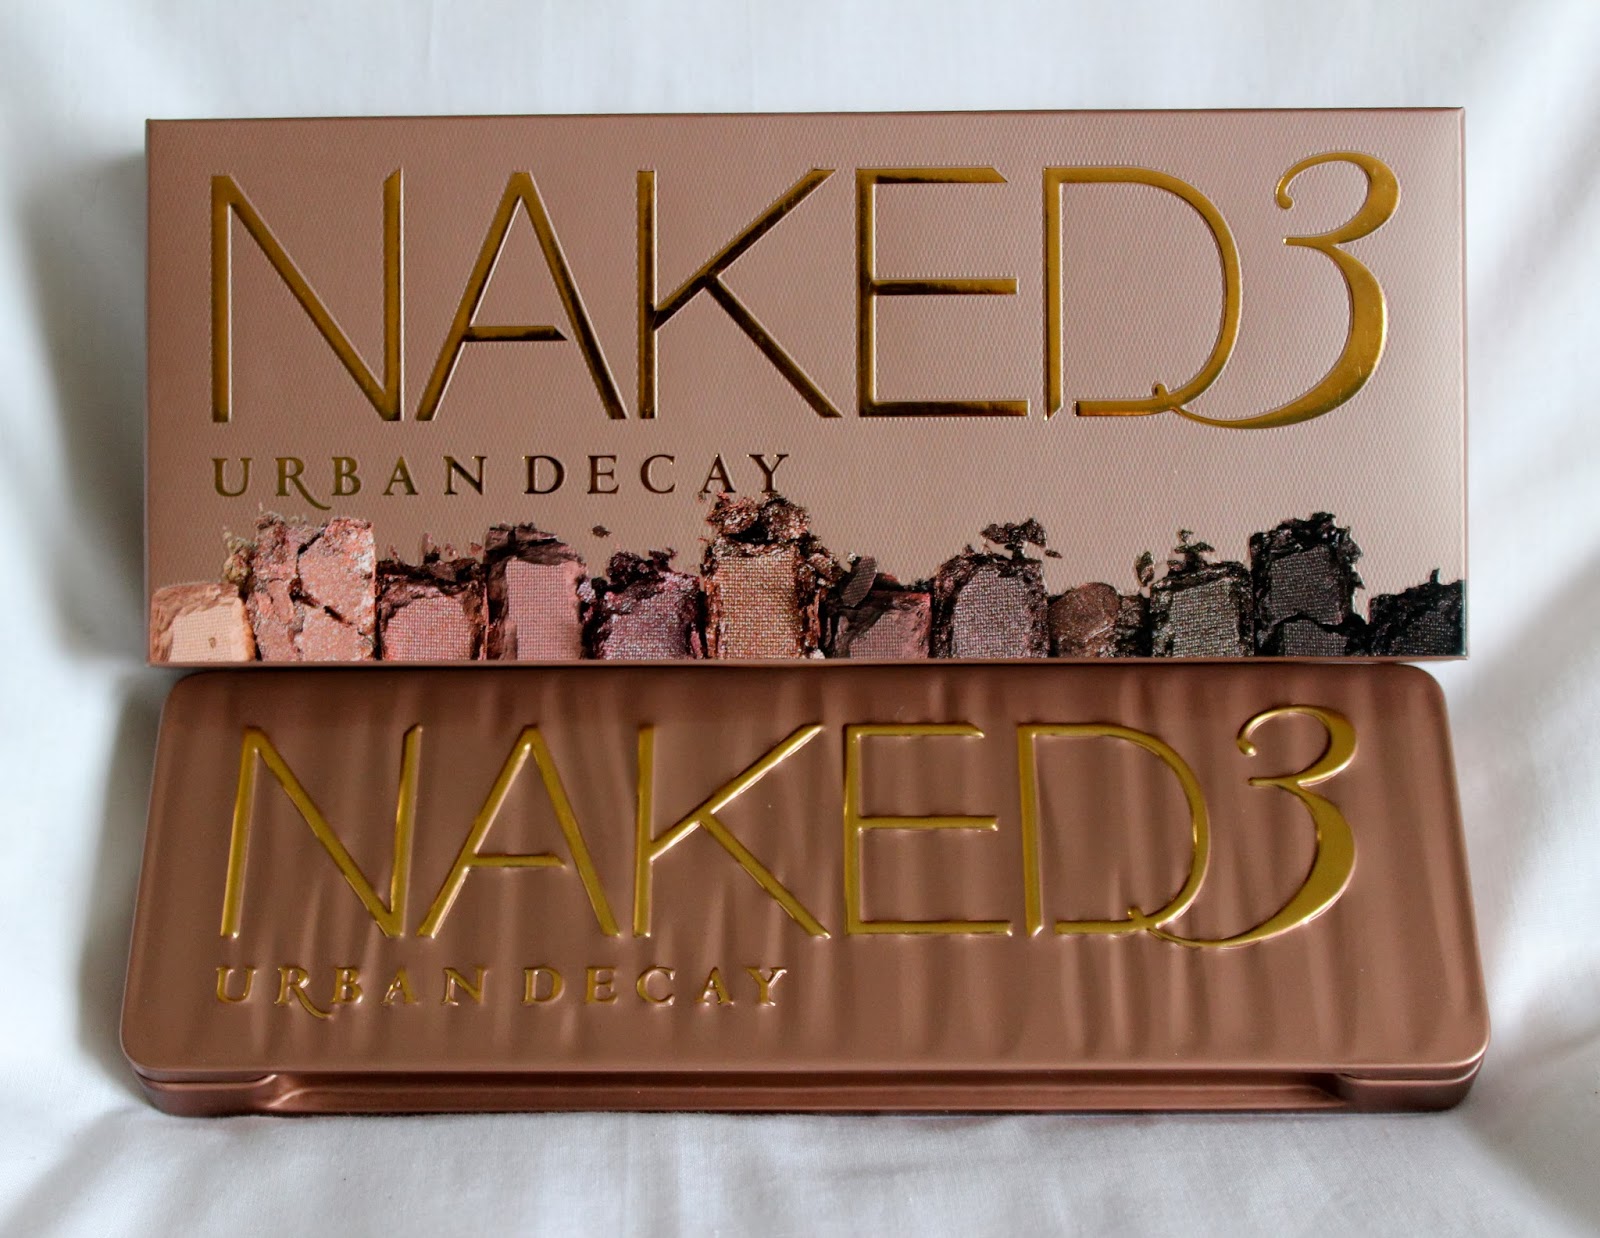 Hanclarky: Urban Decay Naked 3 Palette